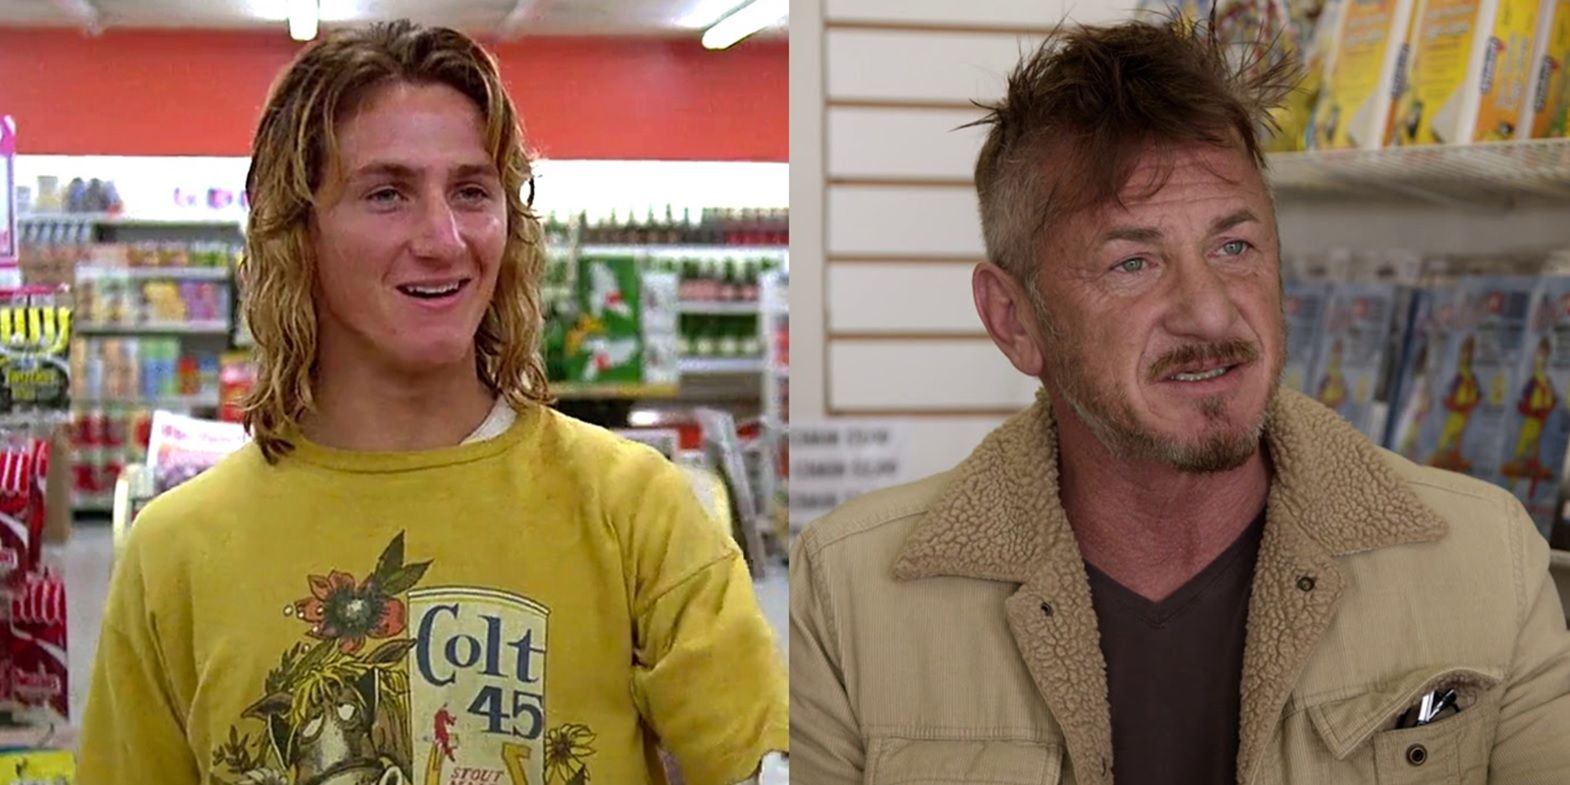 Check out the Sean Penn photo at Ridgemont High soon and curb your enthusiasm